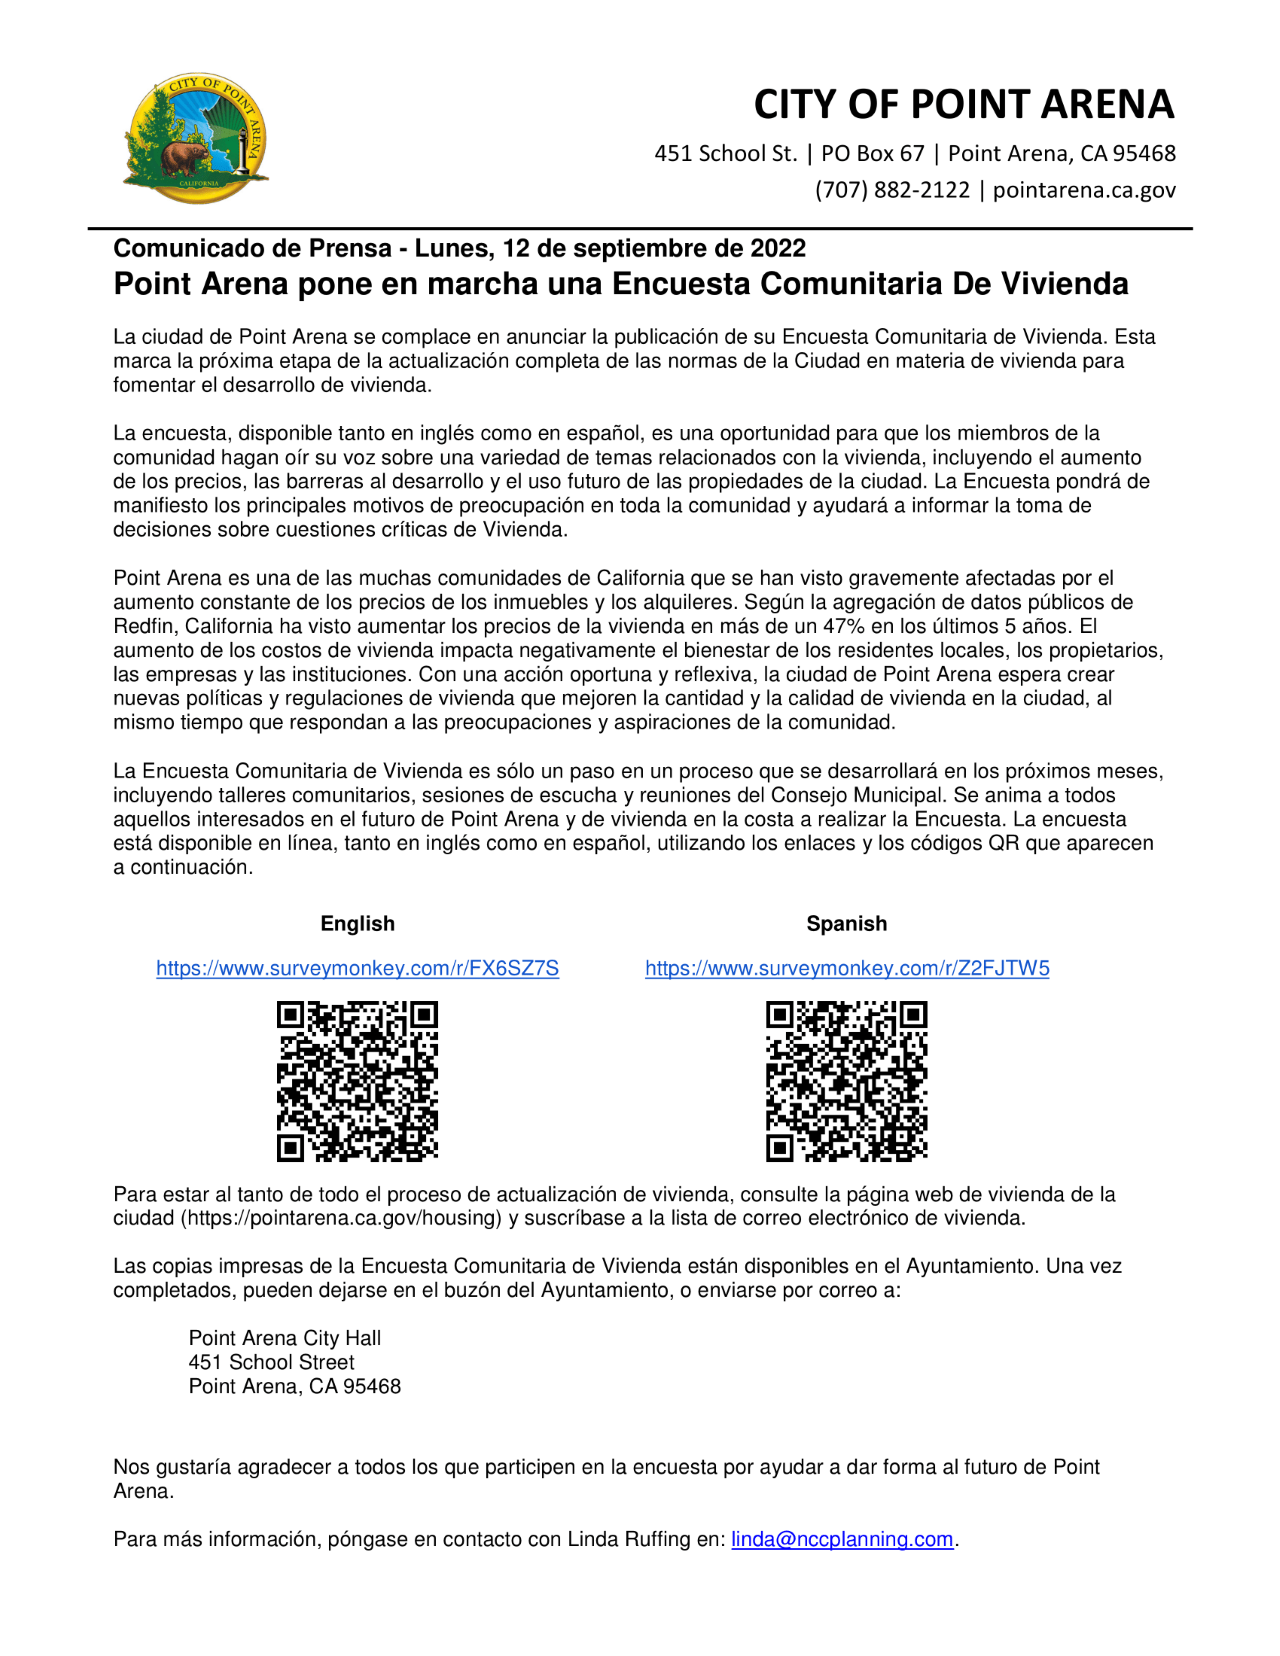 Press release in Spanish from City of Point Arena regarding housing survey. QCR Codes included with survey monkey links.